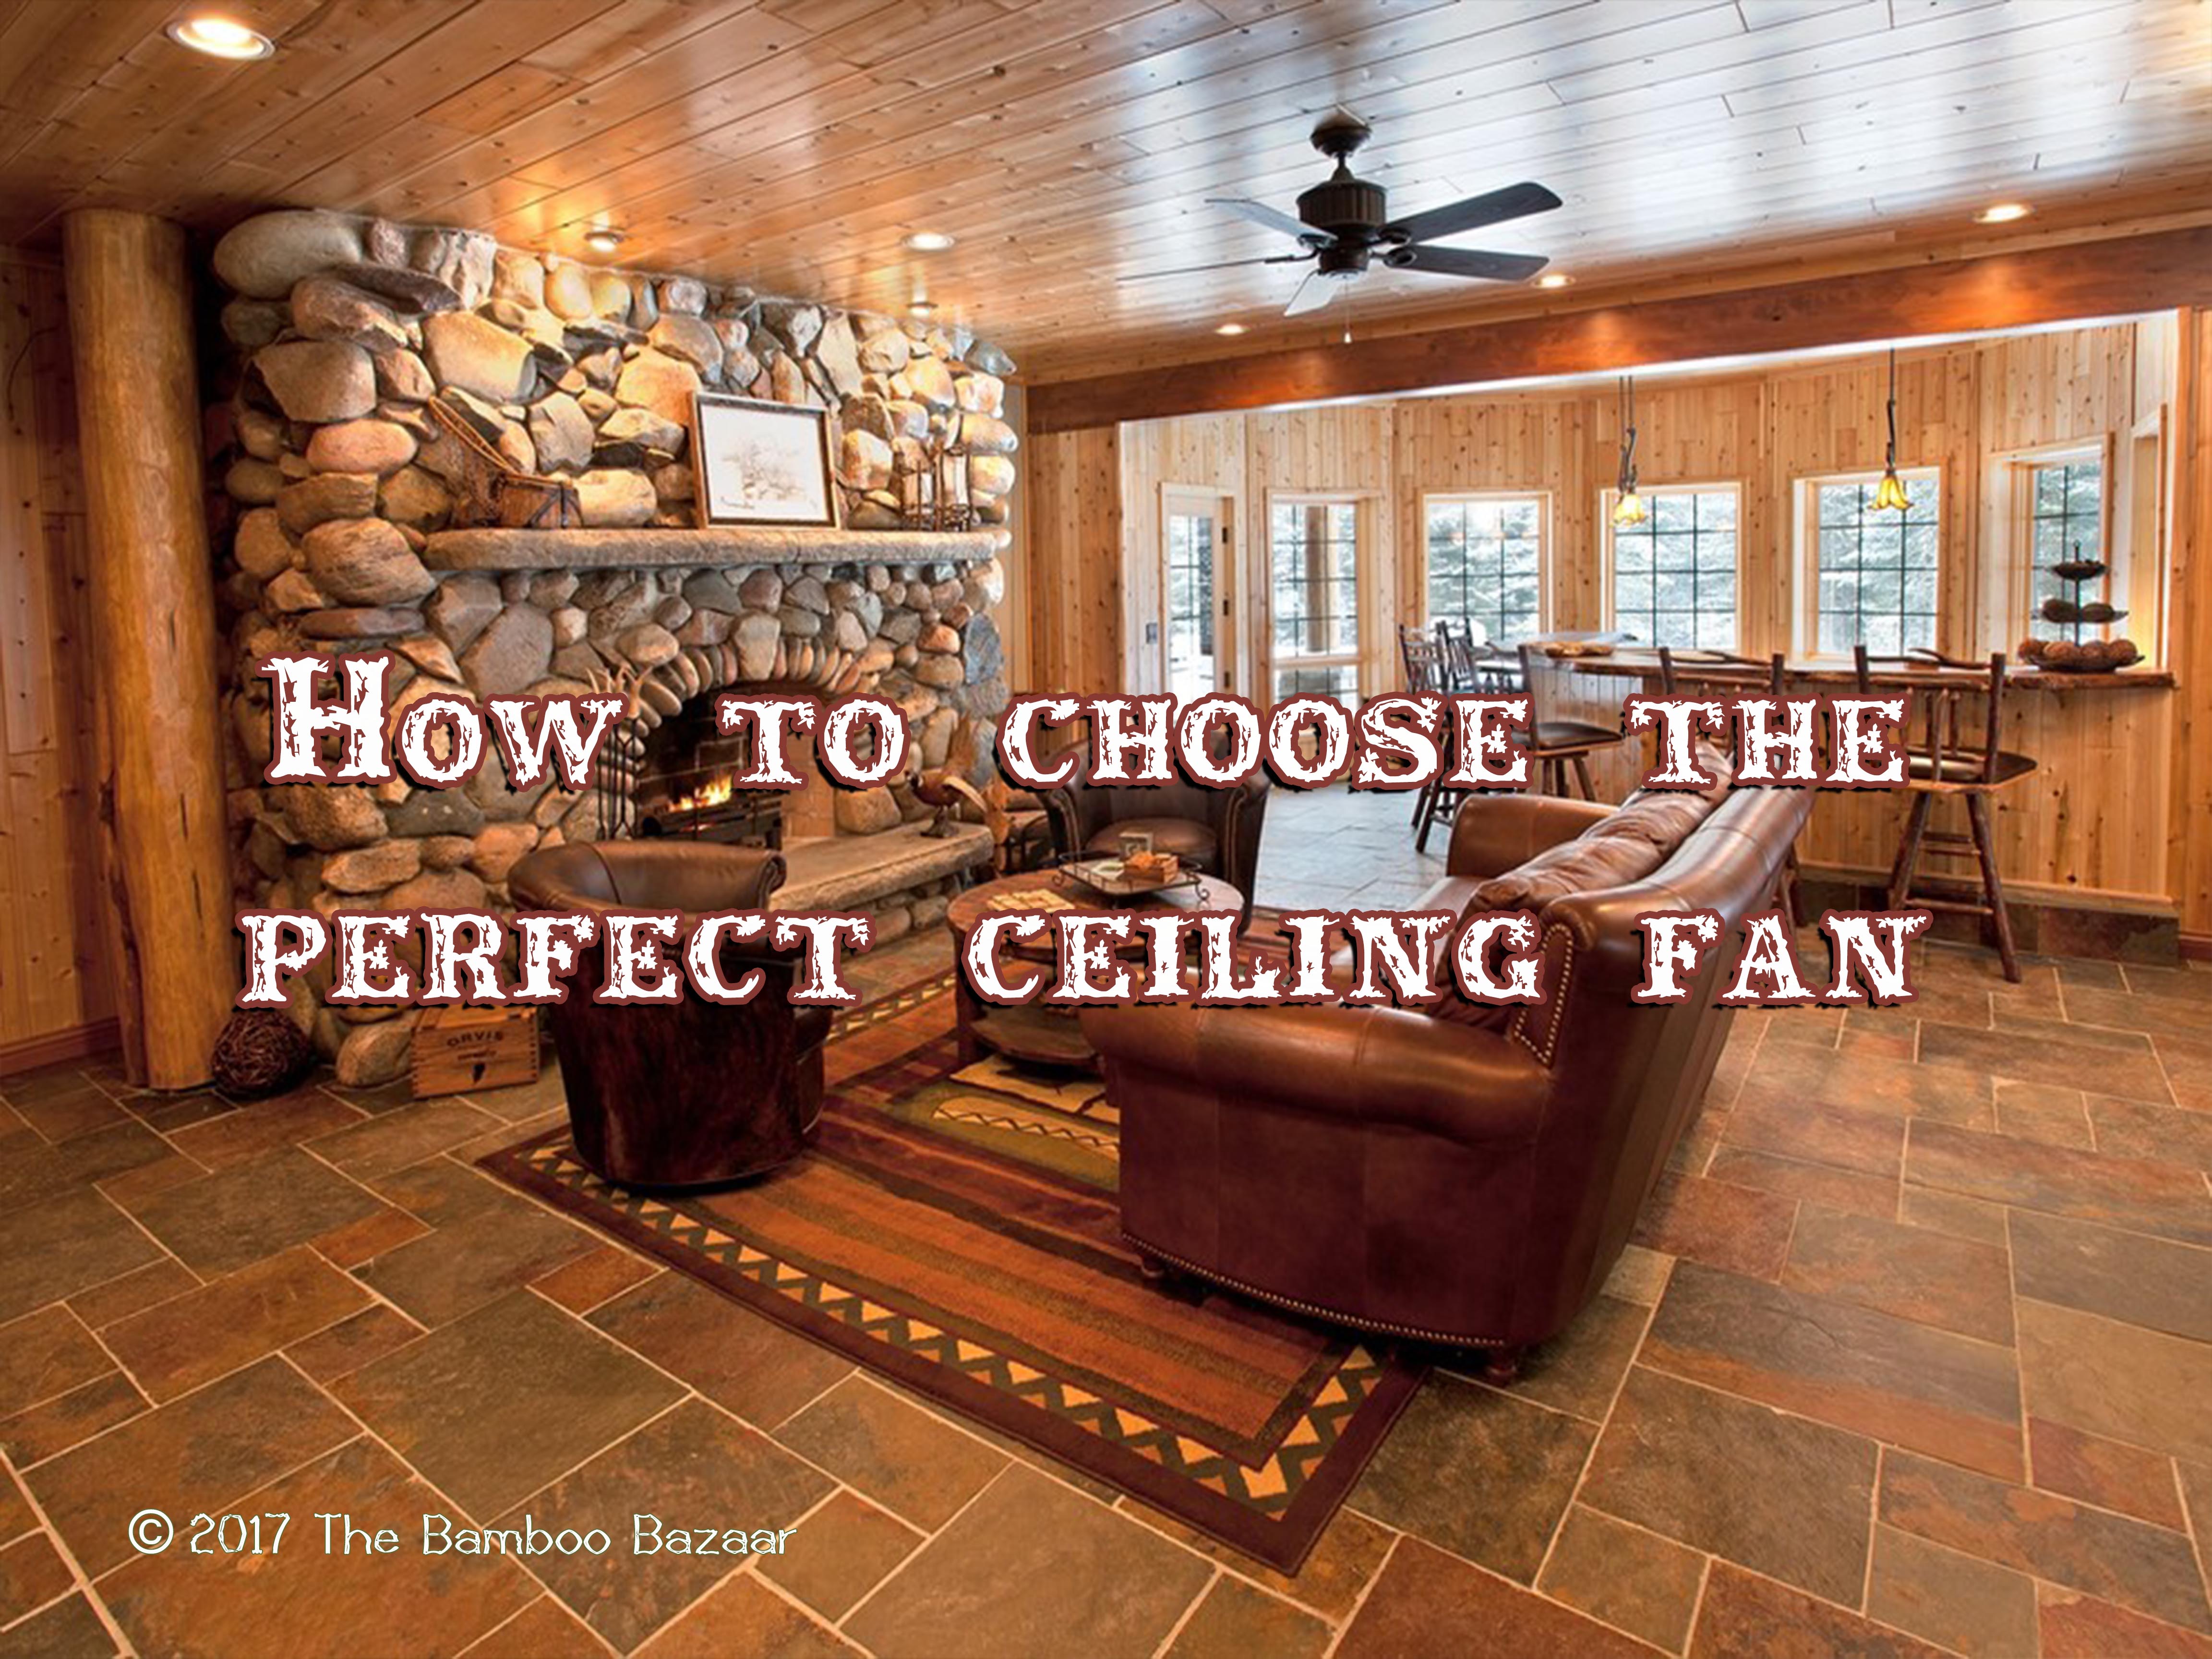 How to choose the perfect ceiling fan